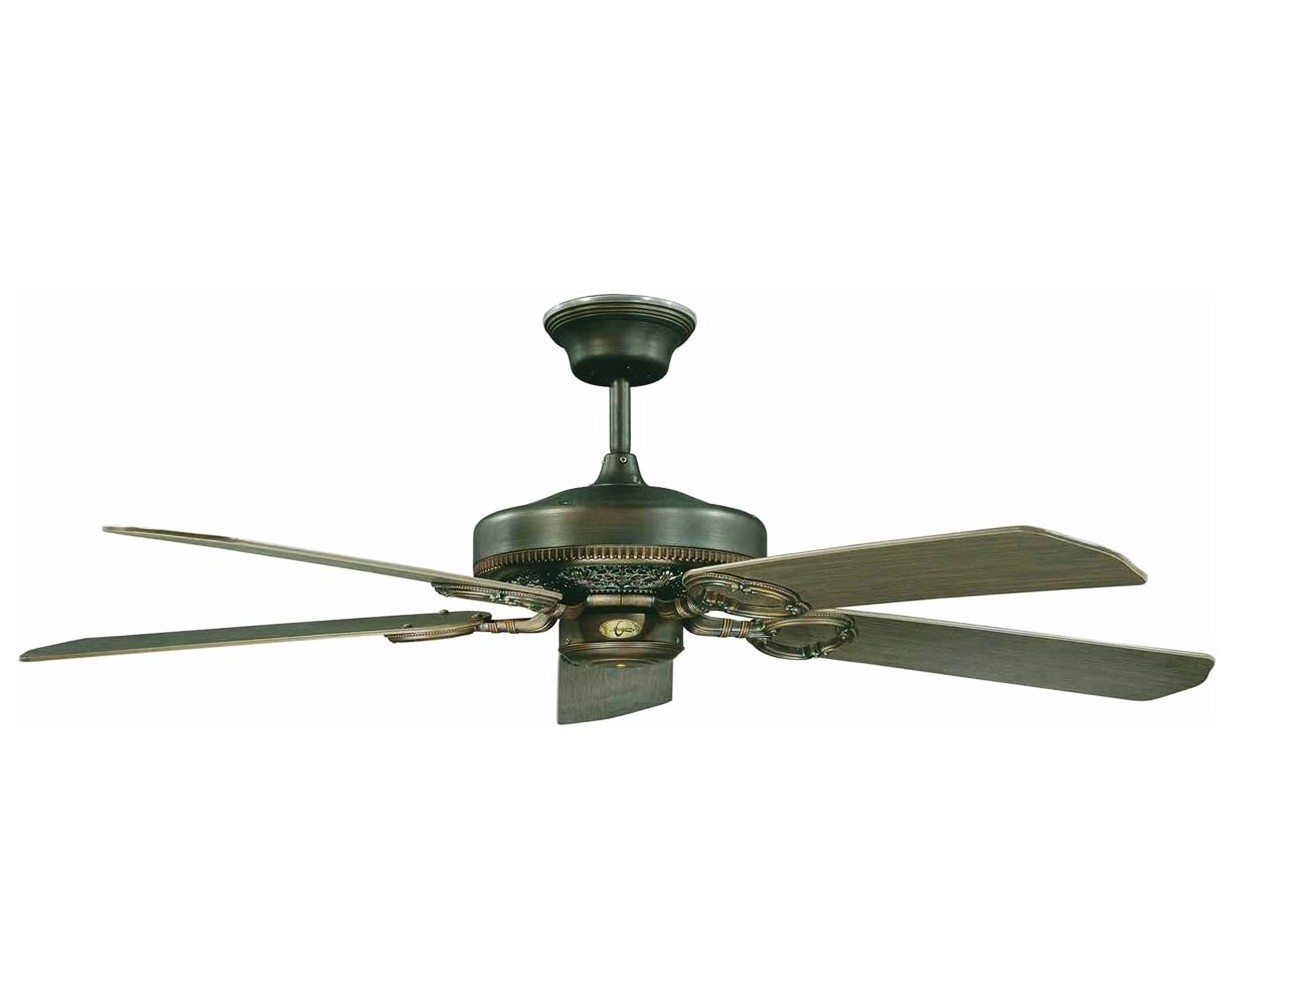 Concord Fans 52" French Quarter Traditional Oil Rubbed Bronze Ceiling Fan 52FQ5ORB